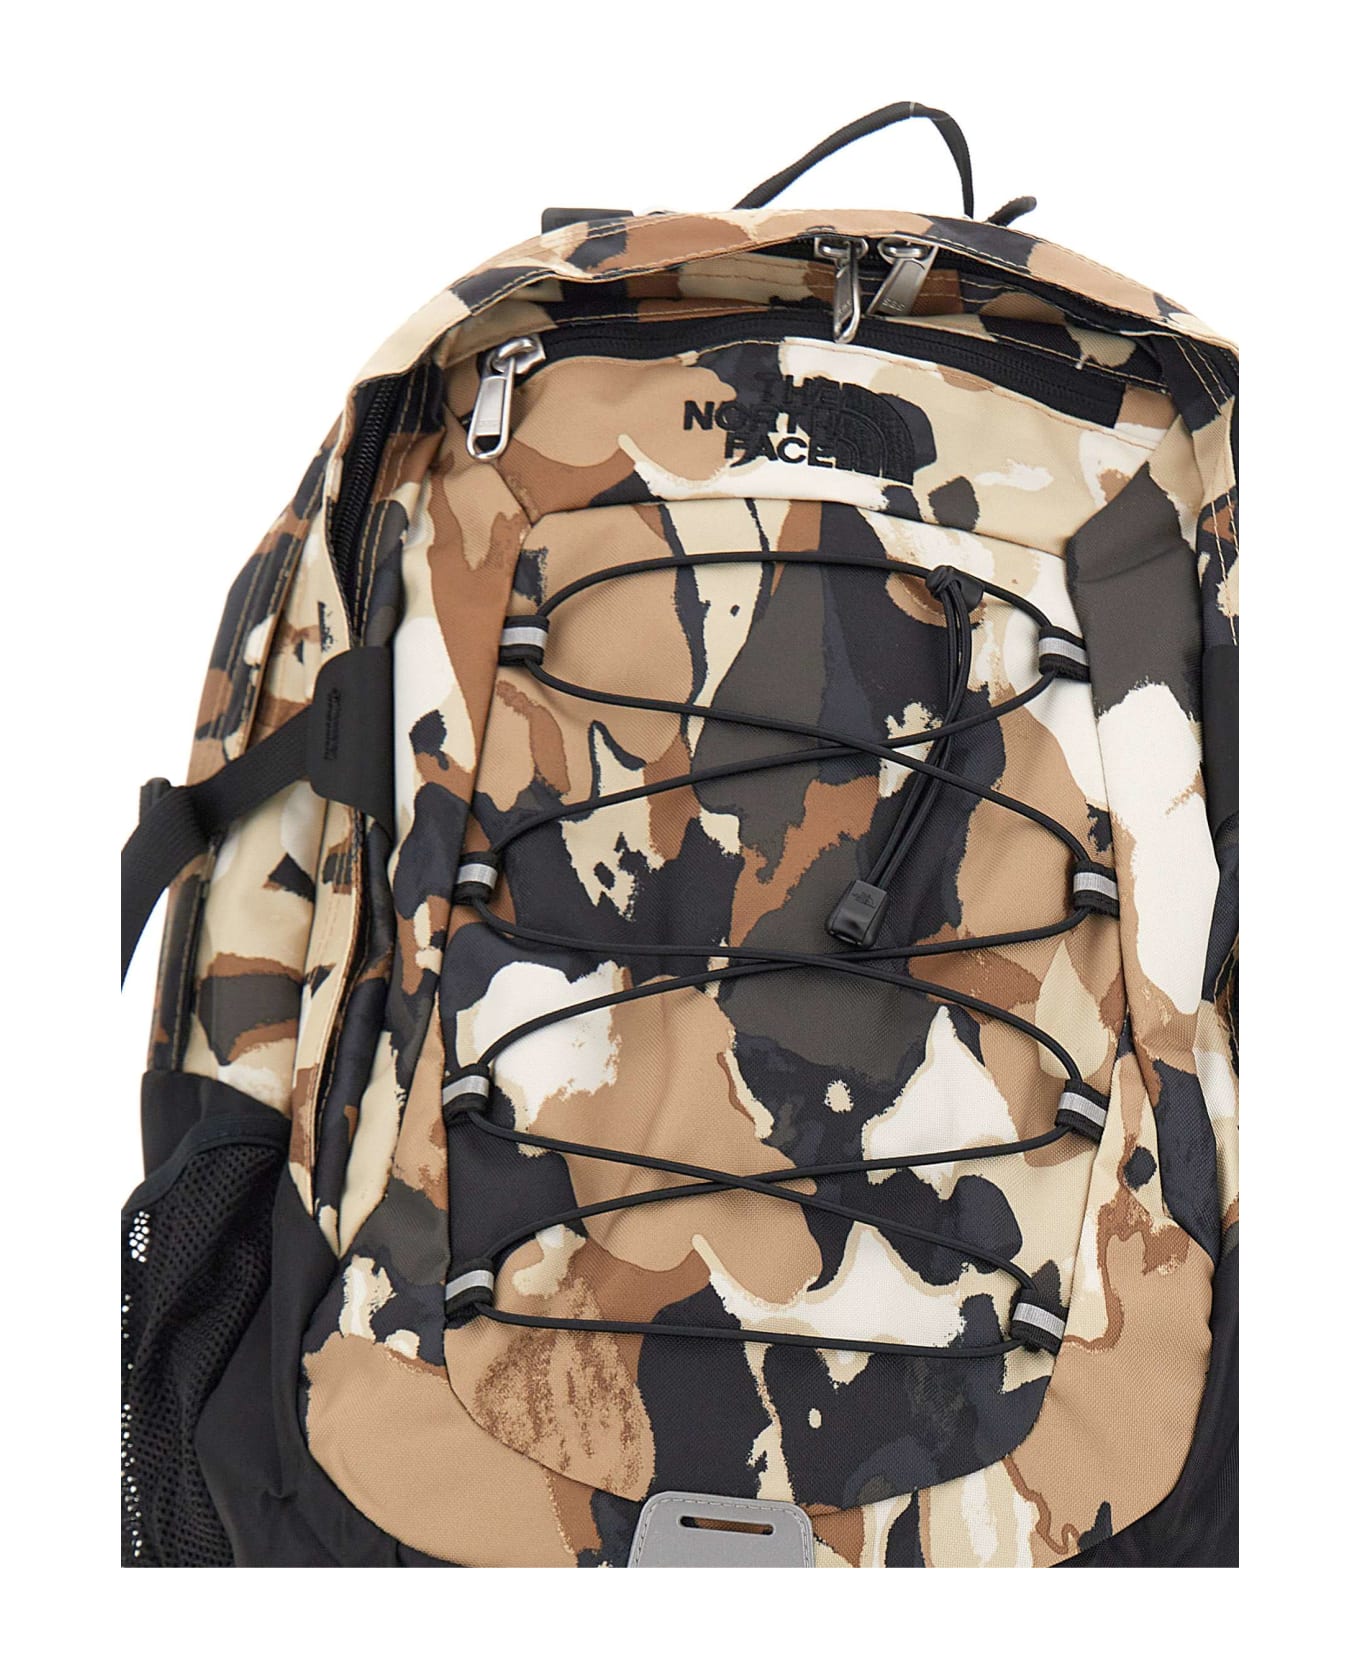 The North Face "borealis Classic" Backpack - MULTICOLOR